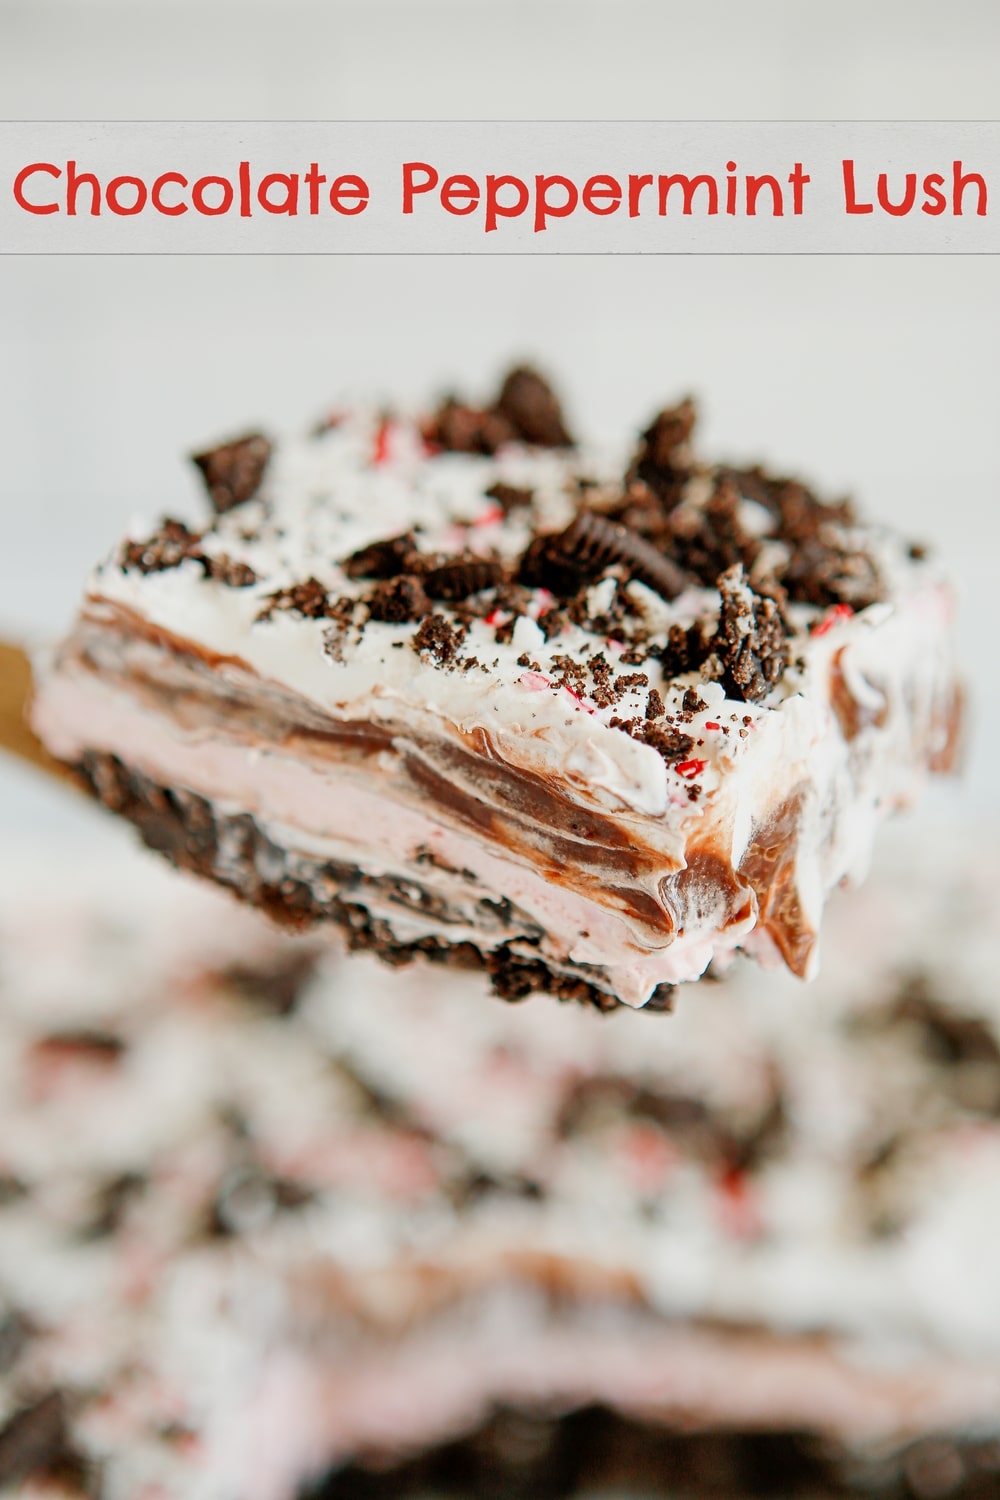 Creamy, delicious layers make this Chocolate Peppermint Lush the perfect no-bake, festive holiday dessert to enjoy with family and friends this season. via @cmpollak1